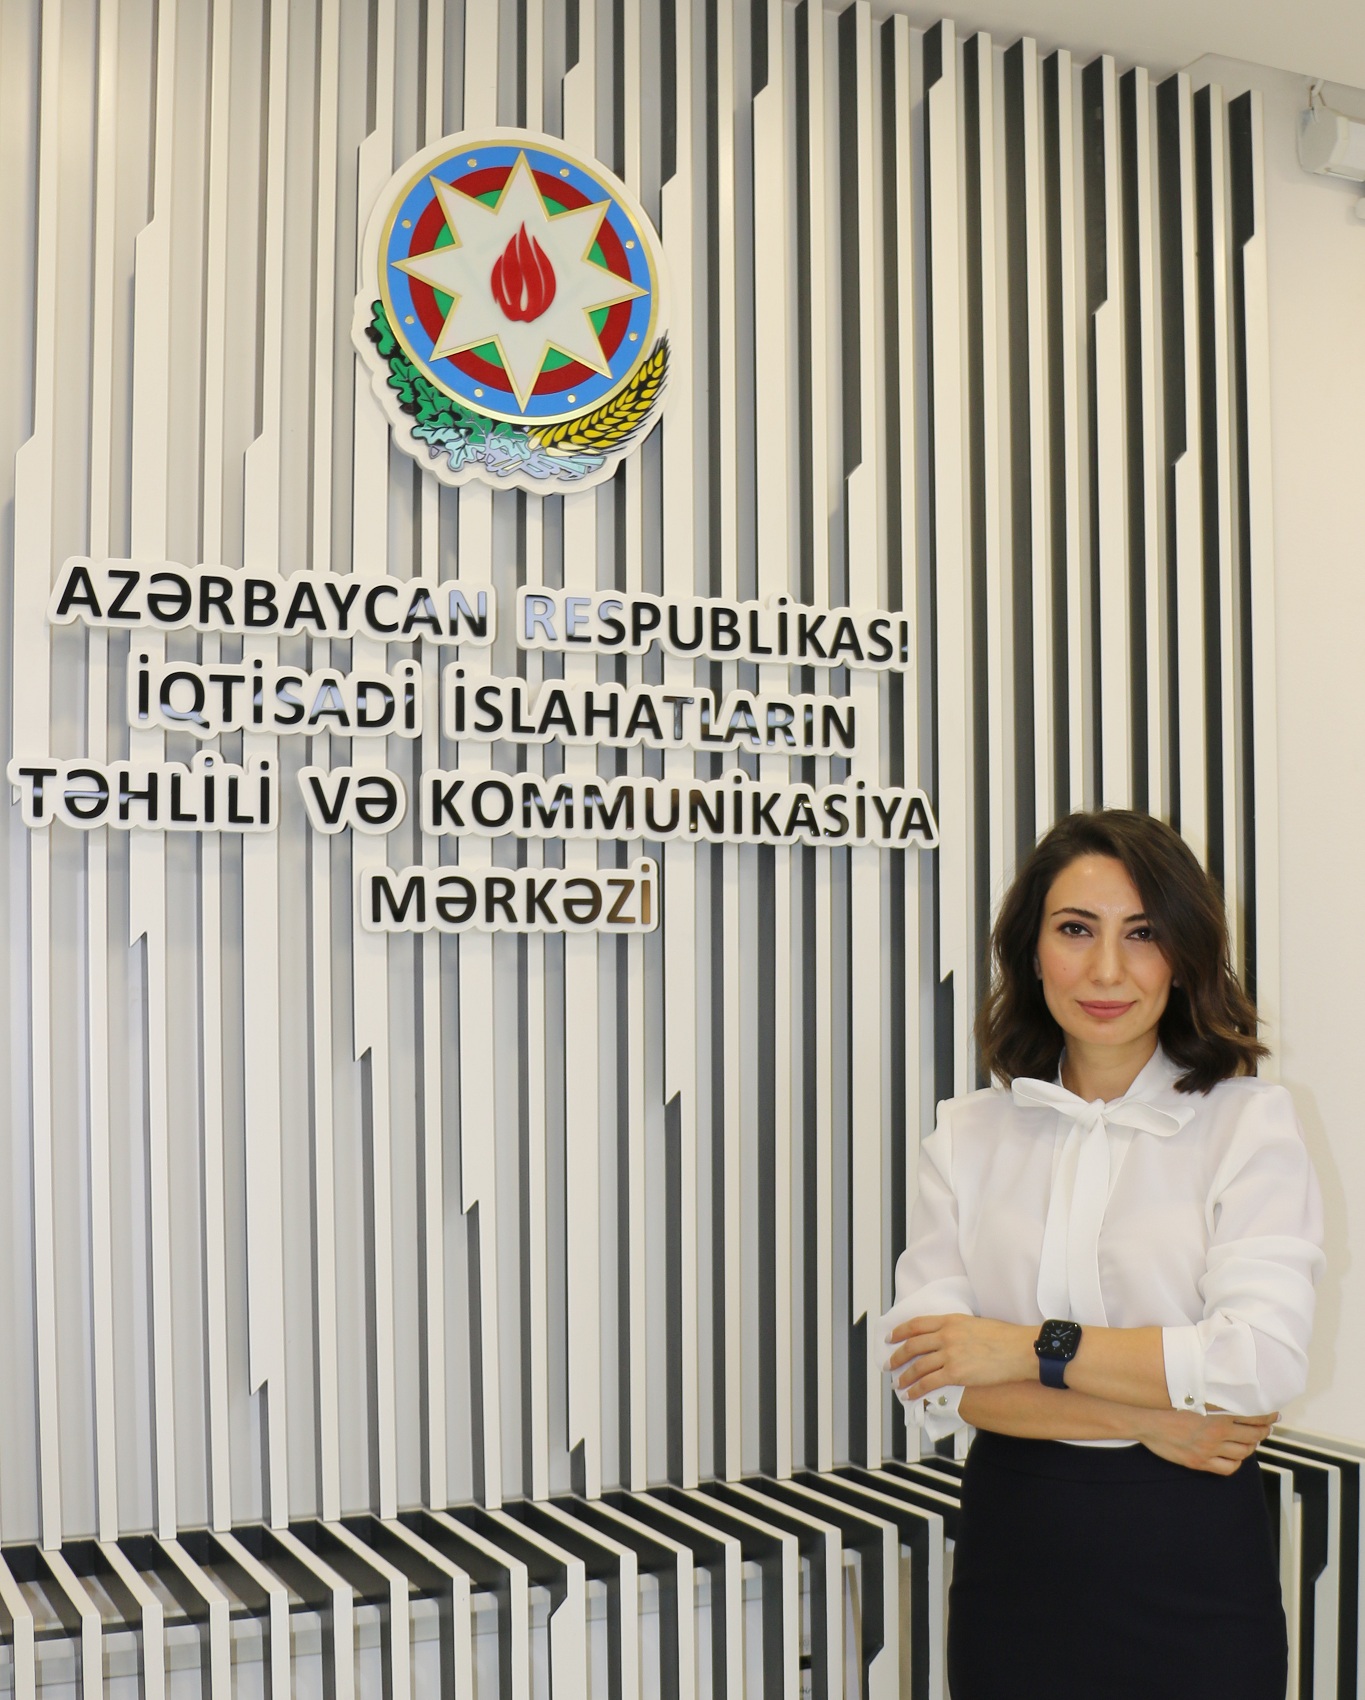 Gunay Guliyeva, “Azerbaijan Has Improved Its Position in the Global Innovation Index Moving 2 Steps Up”